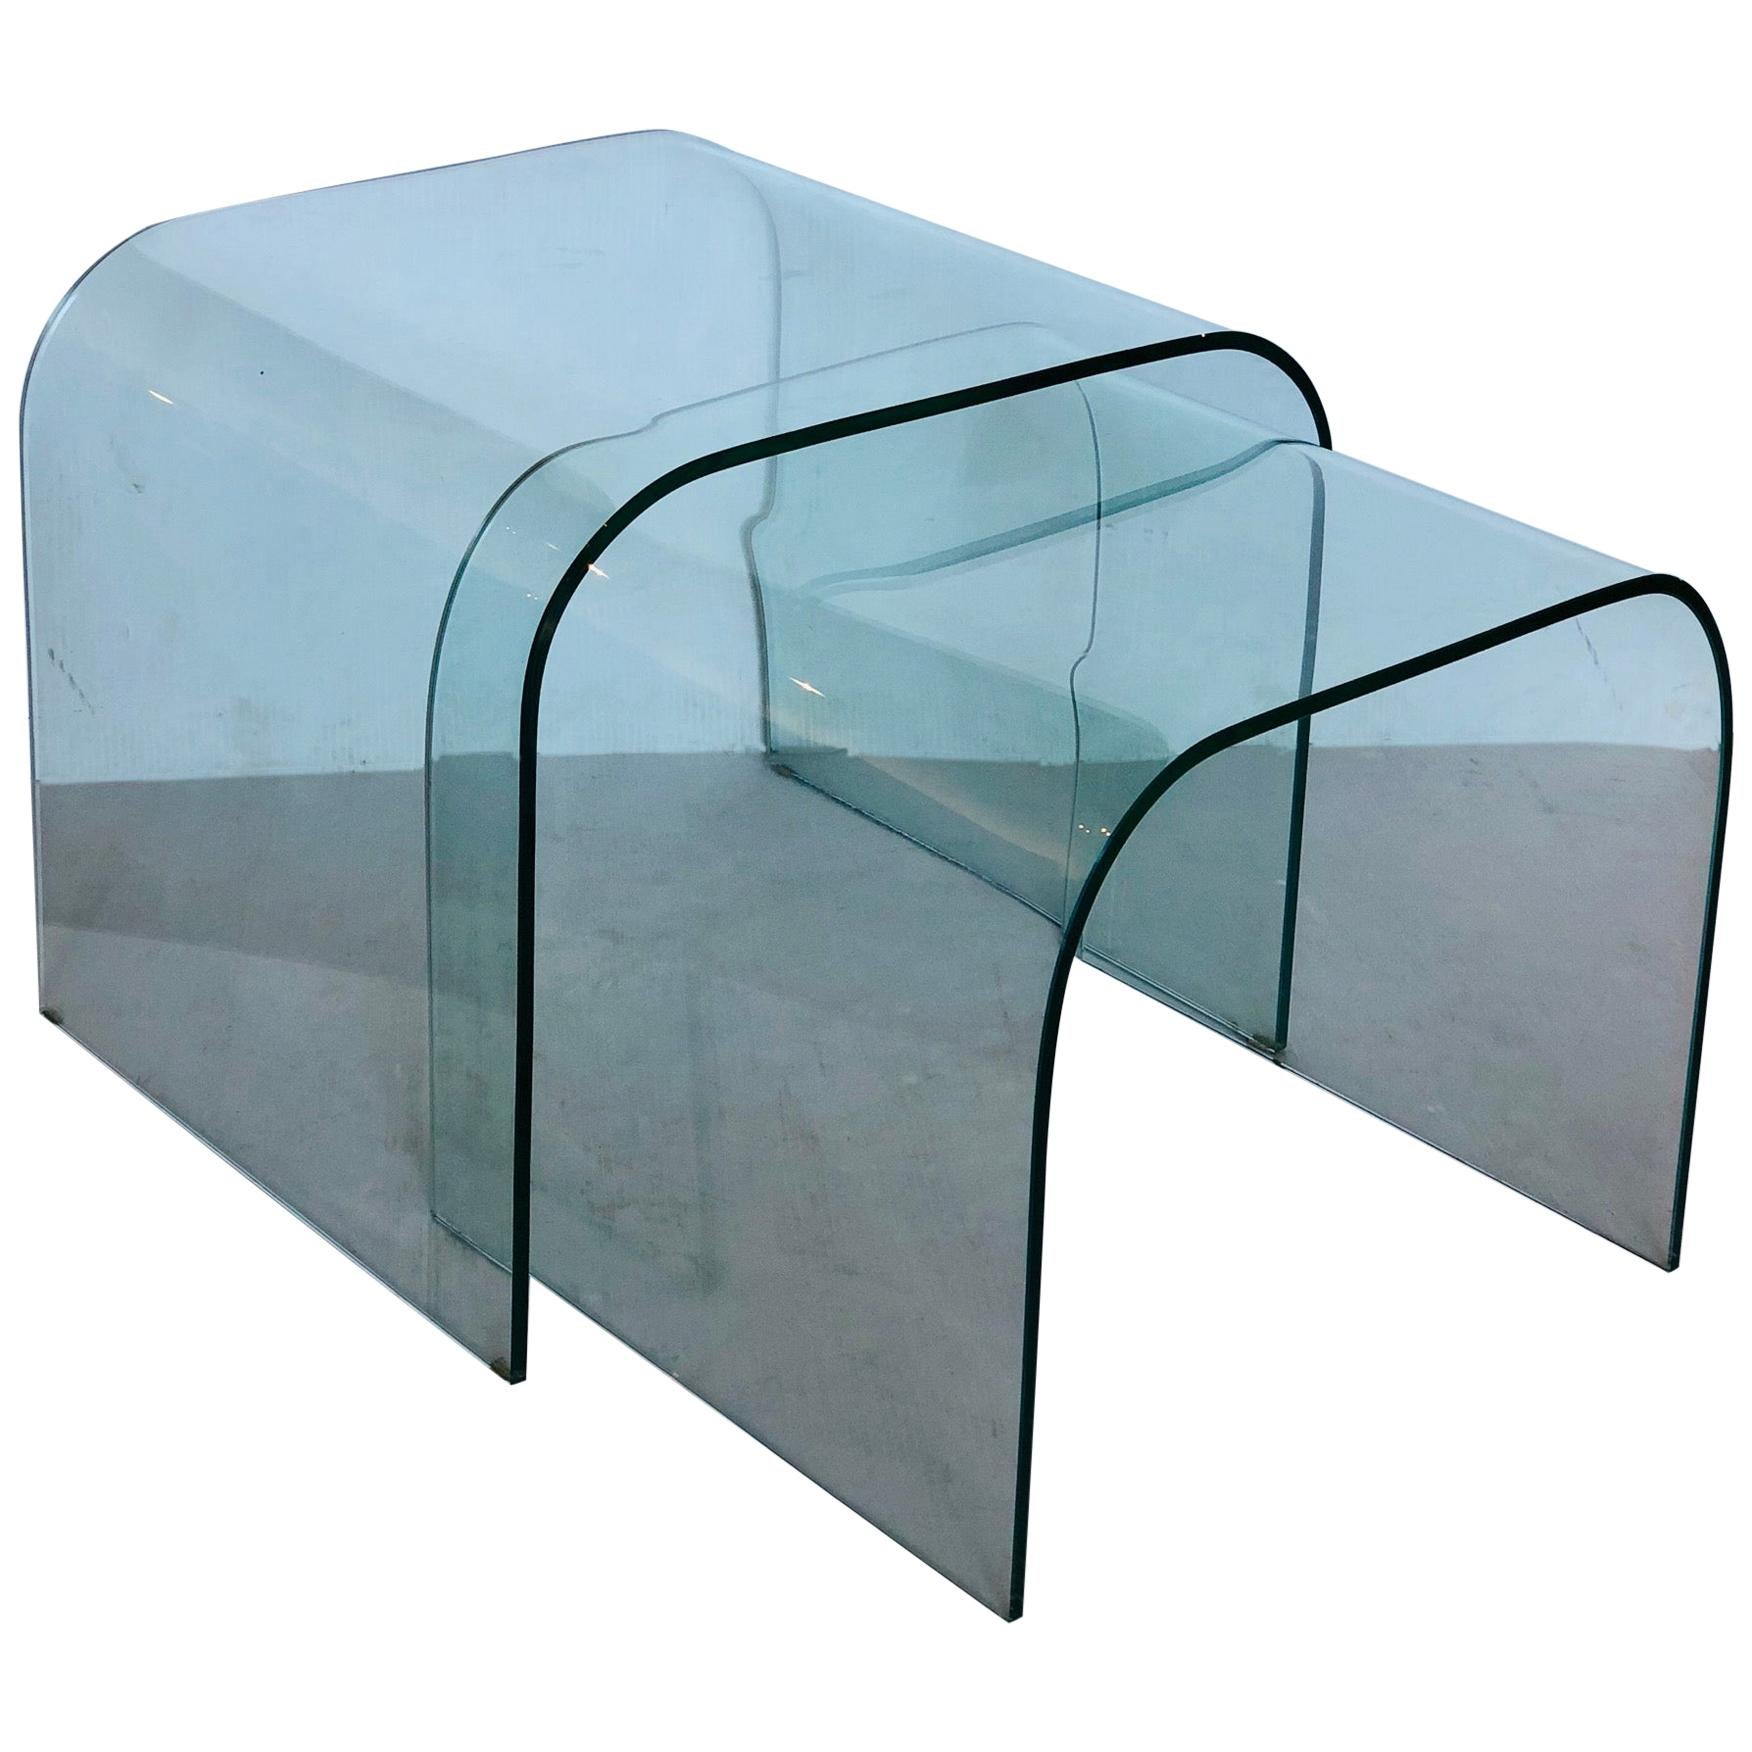 Pair of Molded Glass Waterfall Nesting Tables by Fiam, Italy